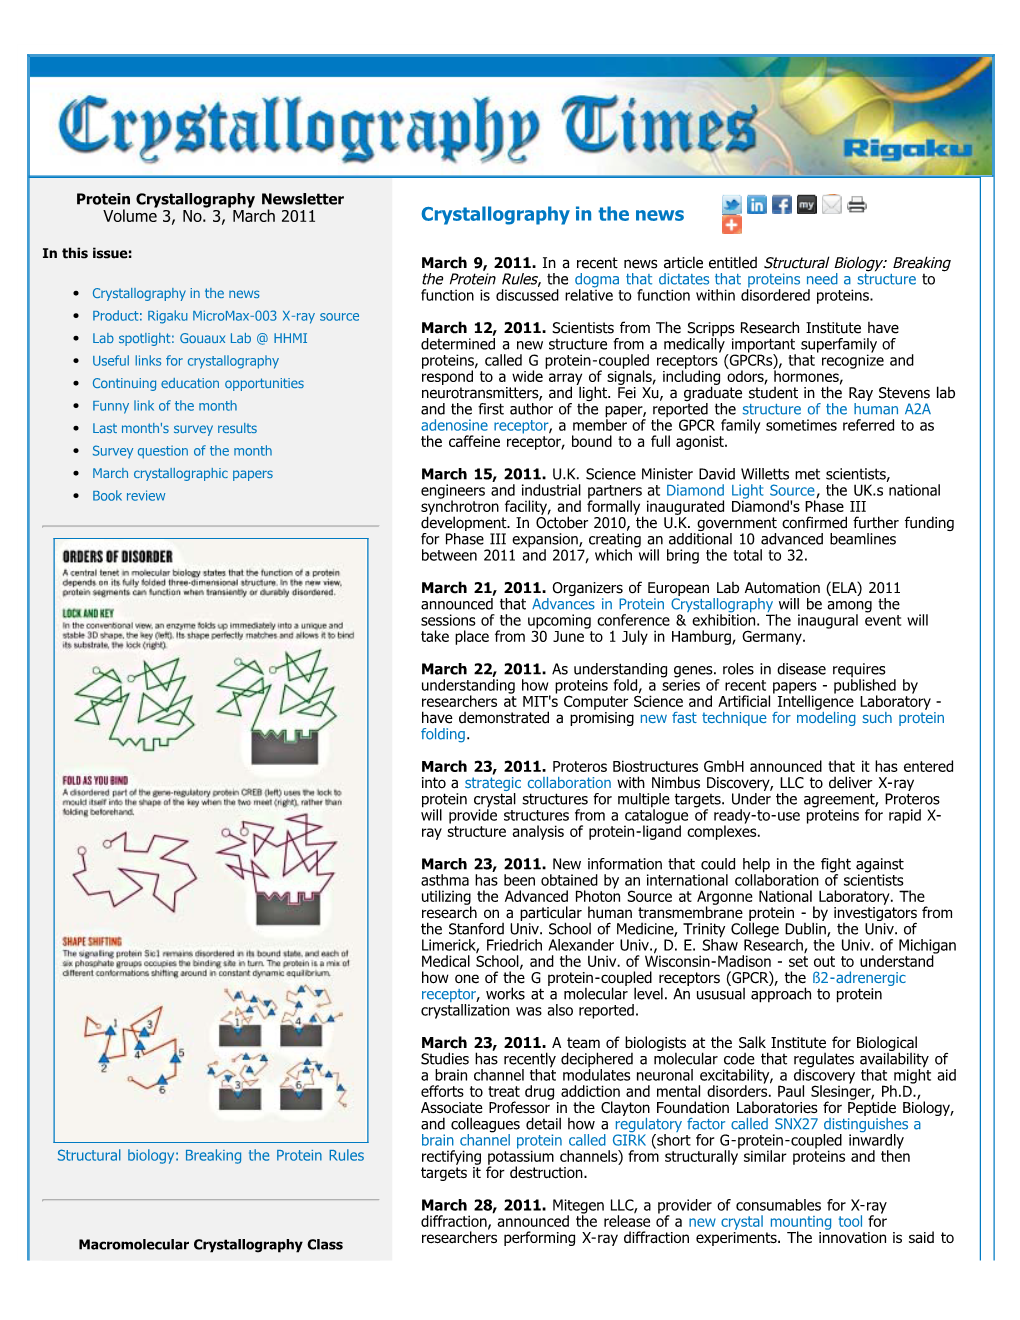 Protein Crystallography Newsletter Volume 3, No